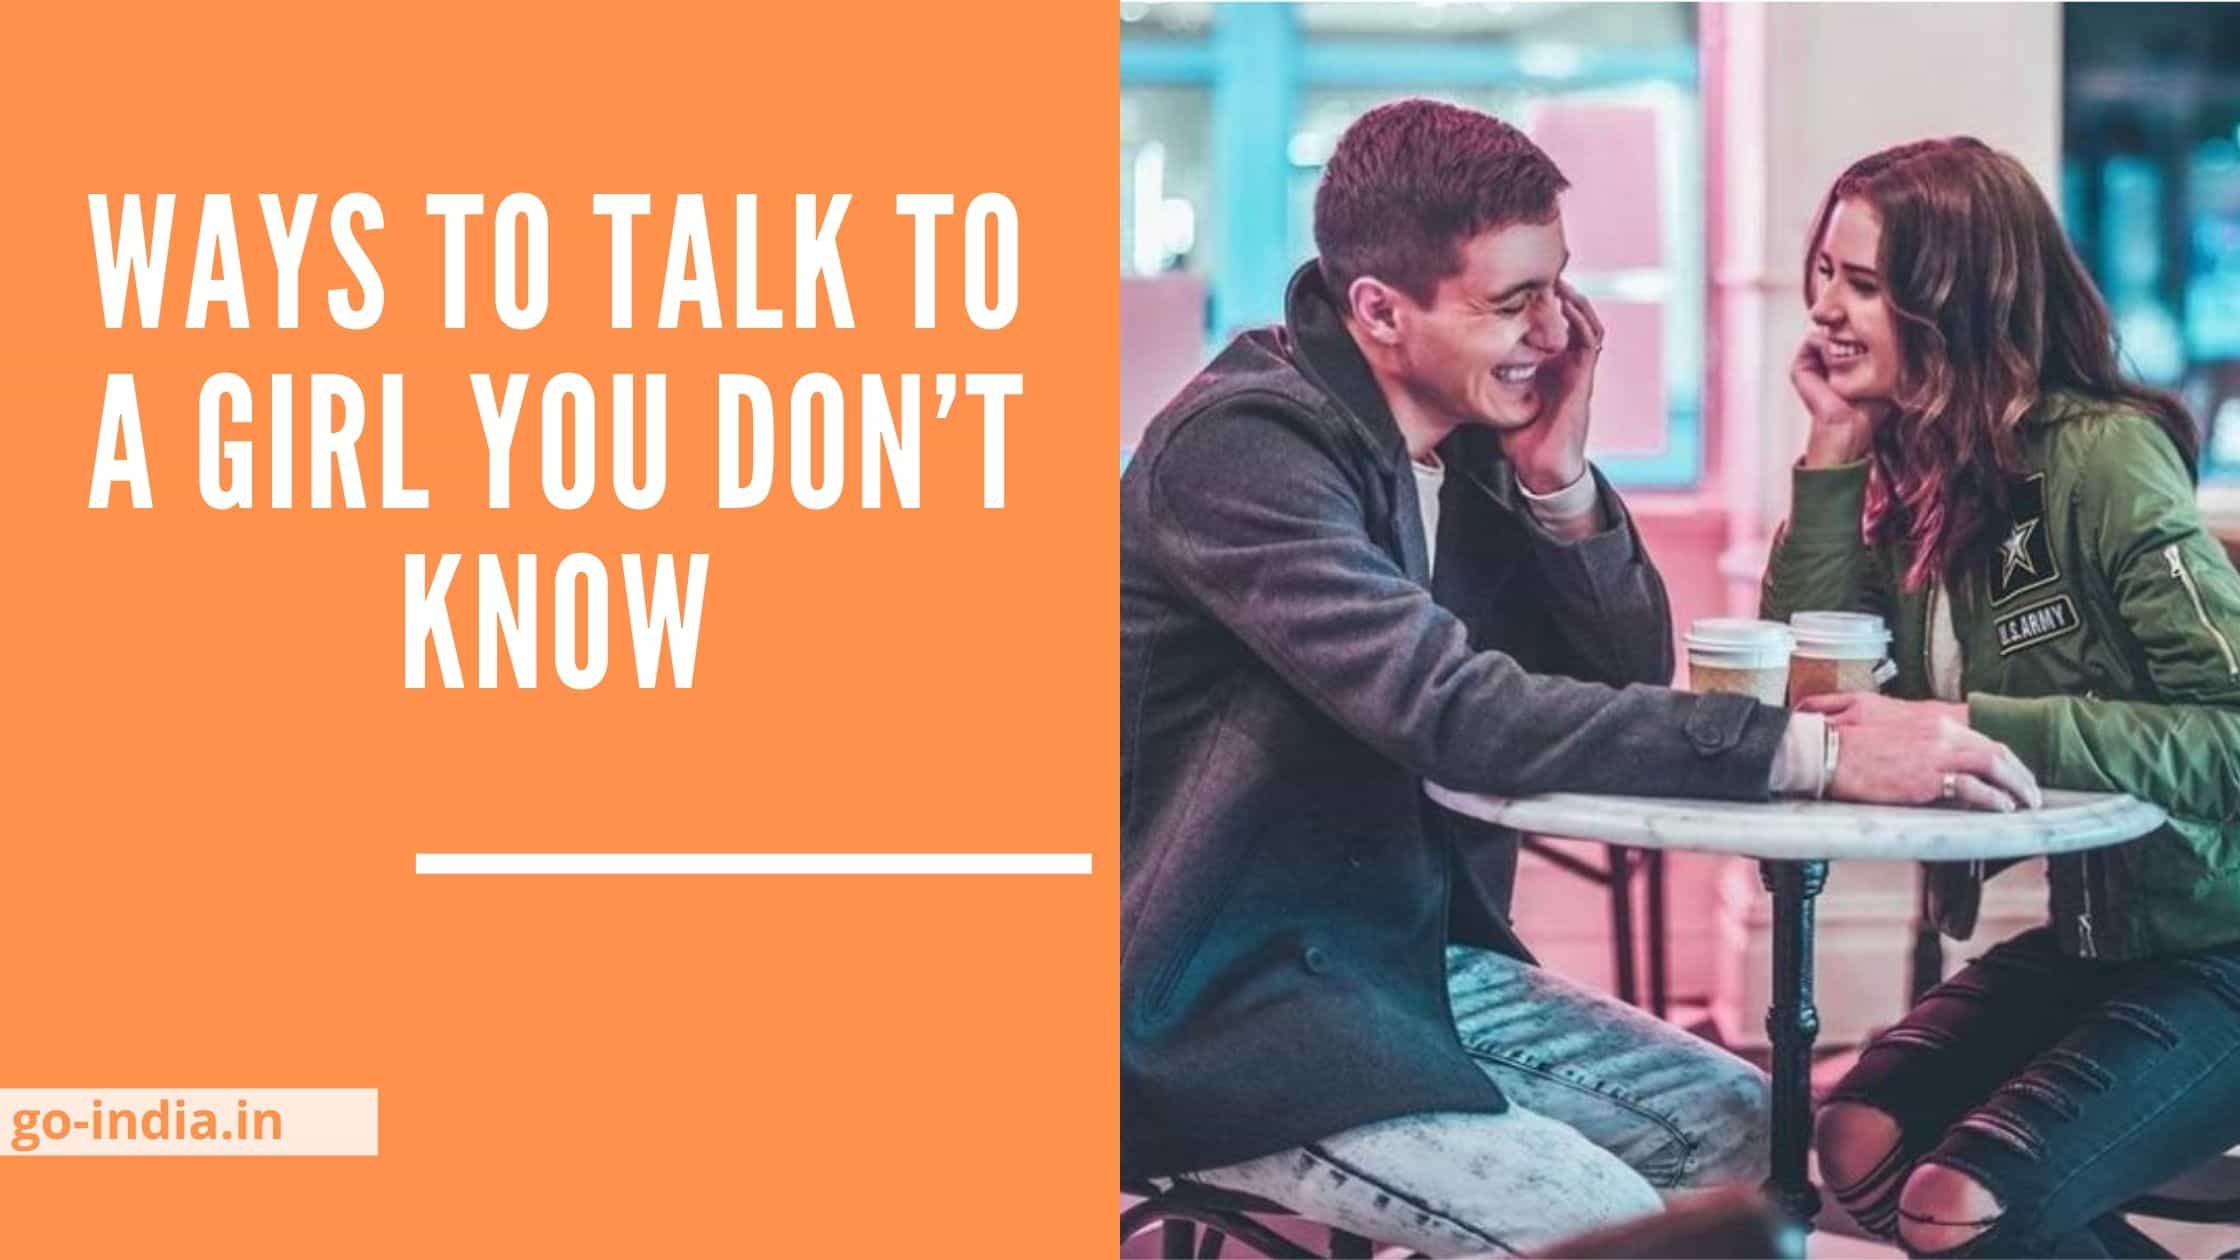 11 Ways to Talk to a Girl You Don’t Know